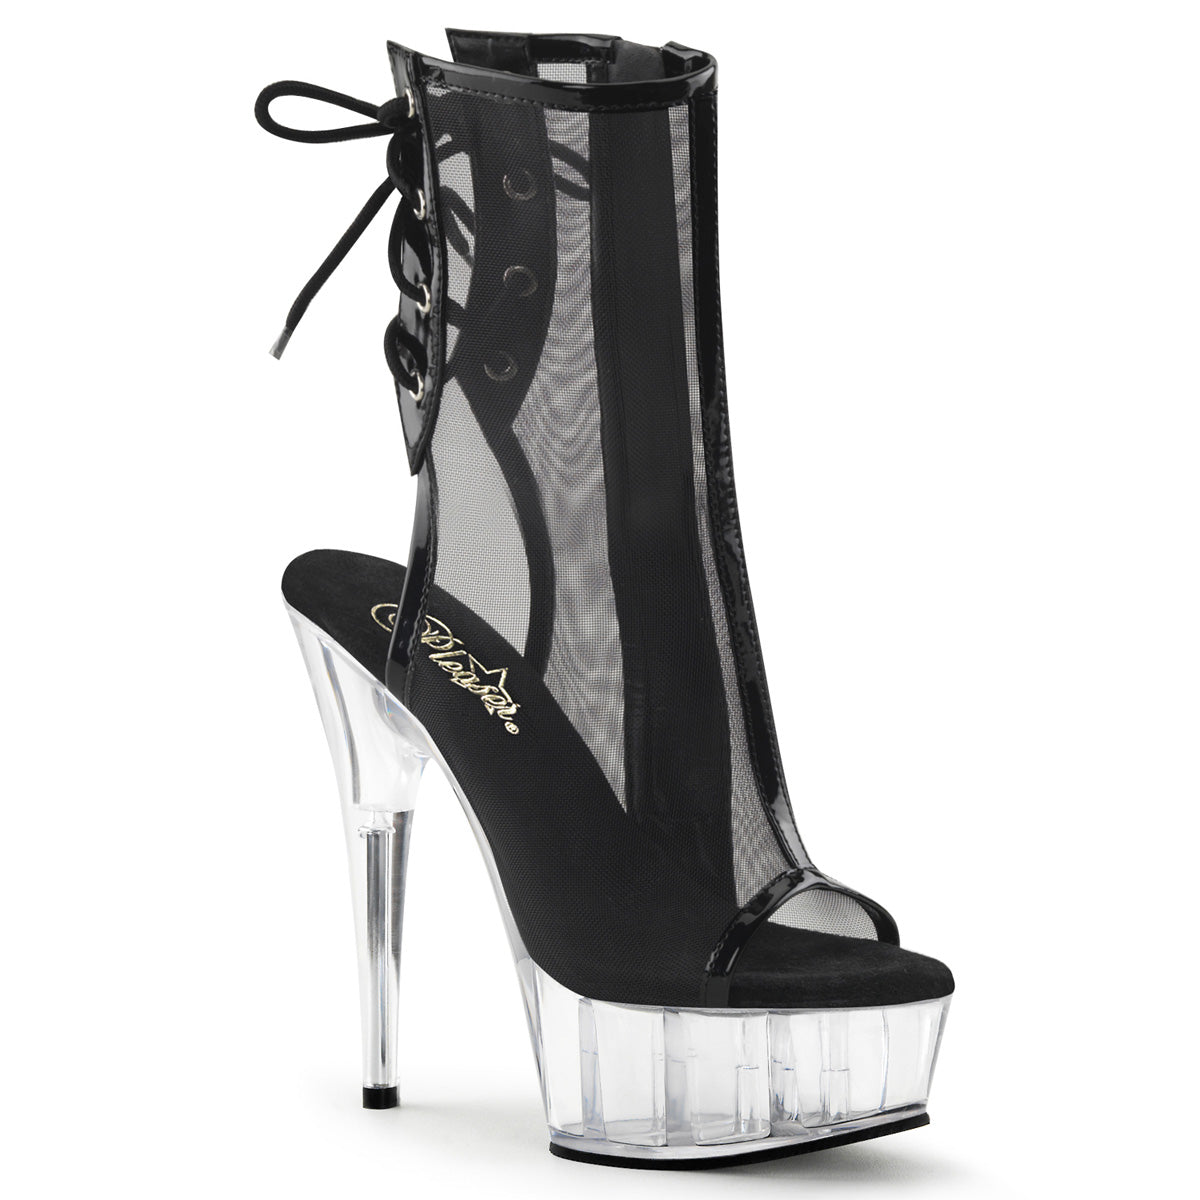 DELIGHT-1018MSH Clear & Black Calf High Peep Toe Boots